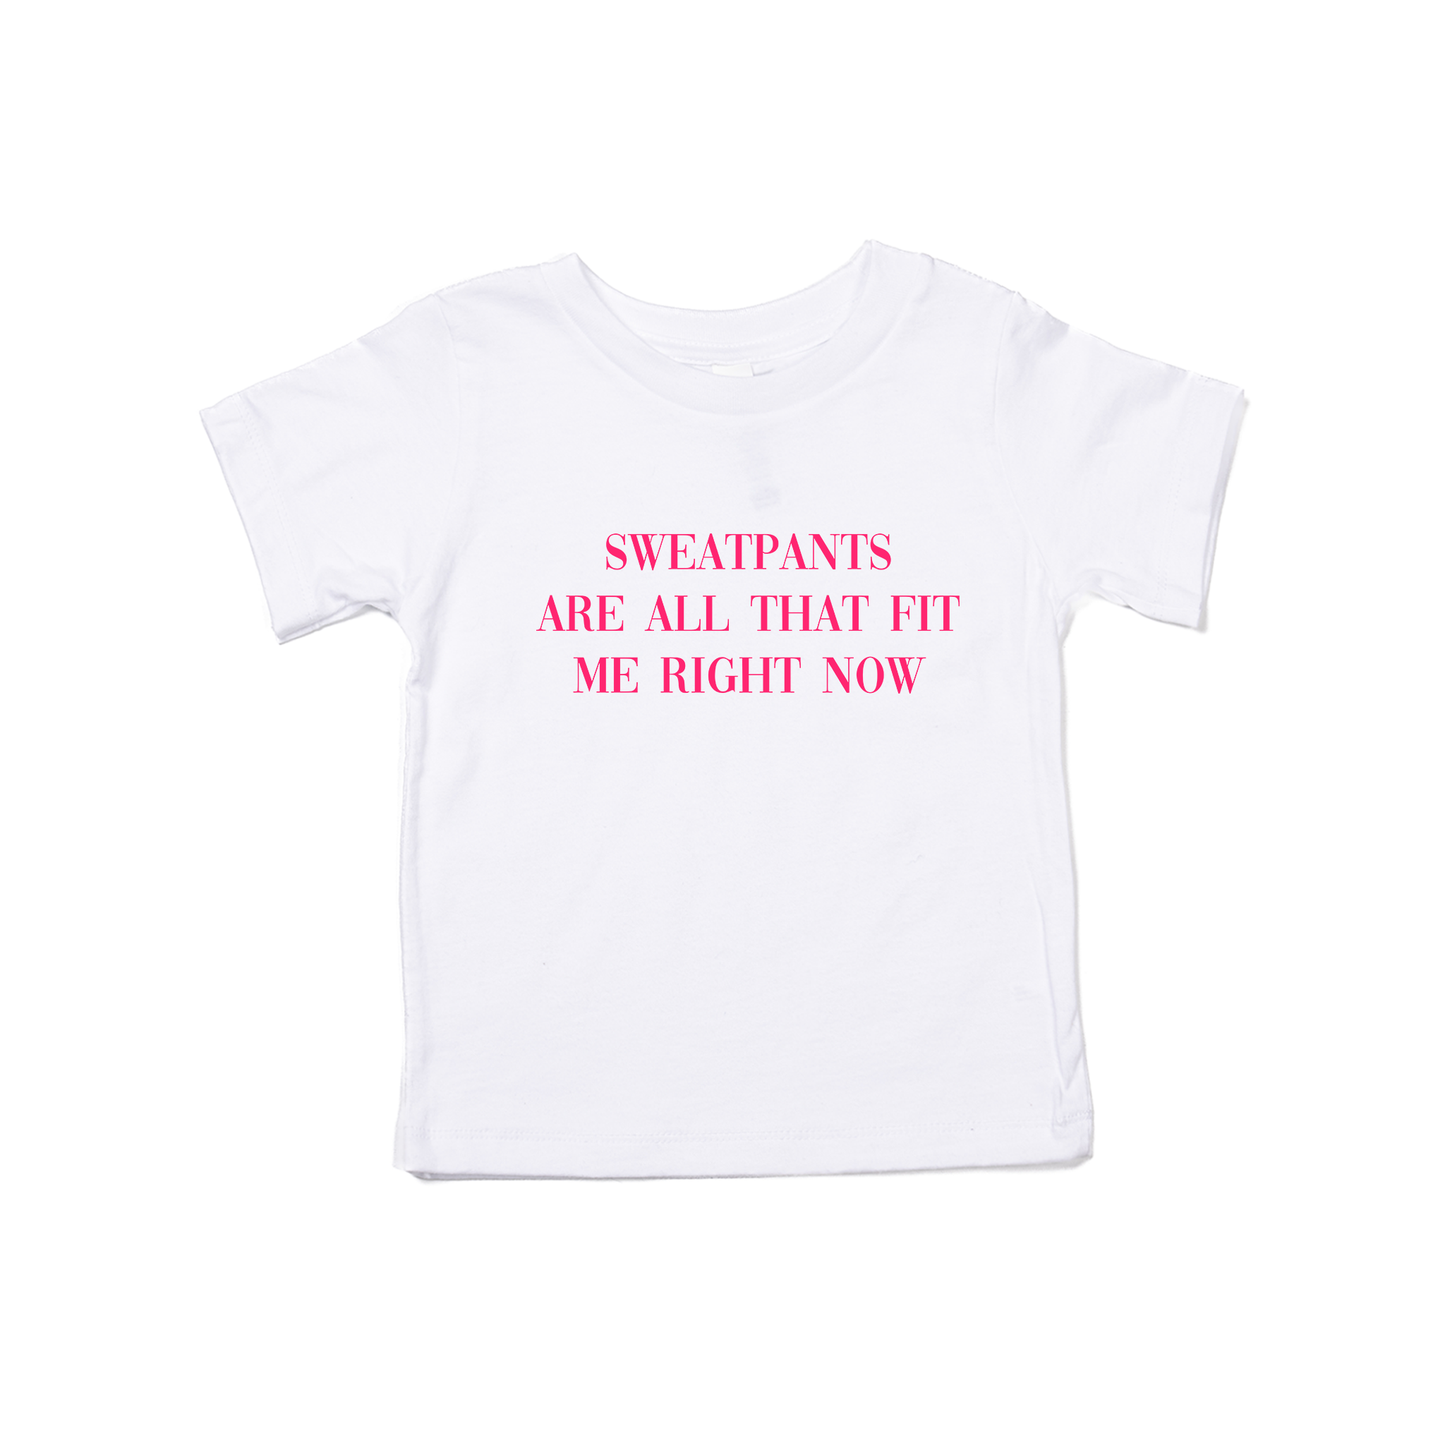 Sweatpants are all that fit me right now (Hot Pink) - Kids Tee (White)